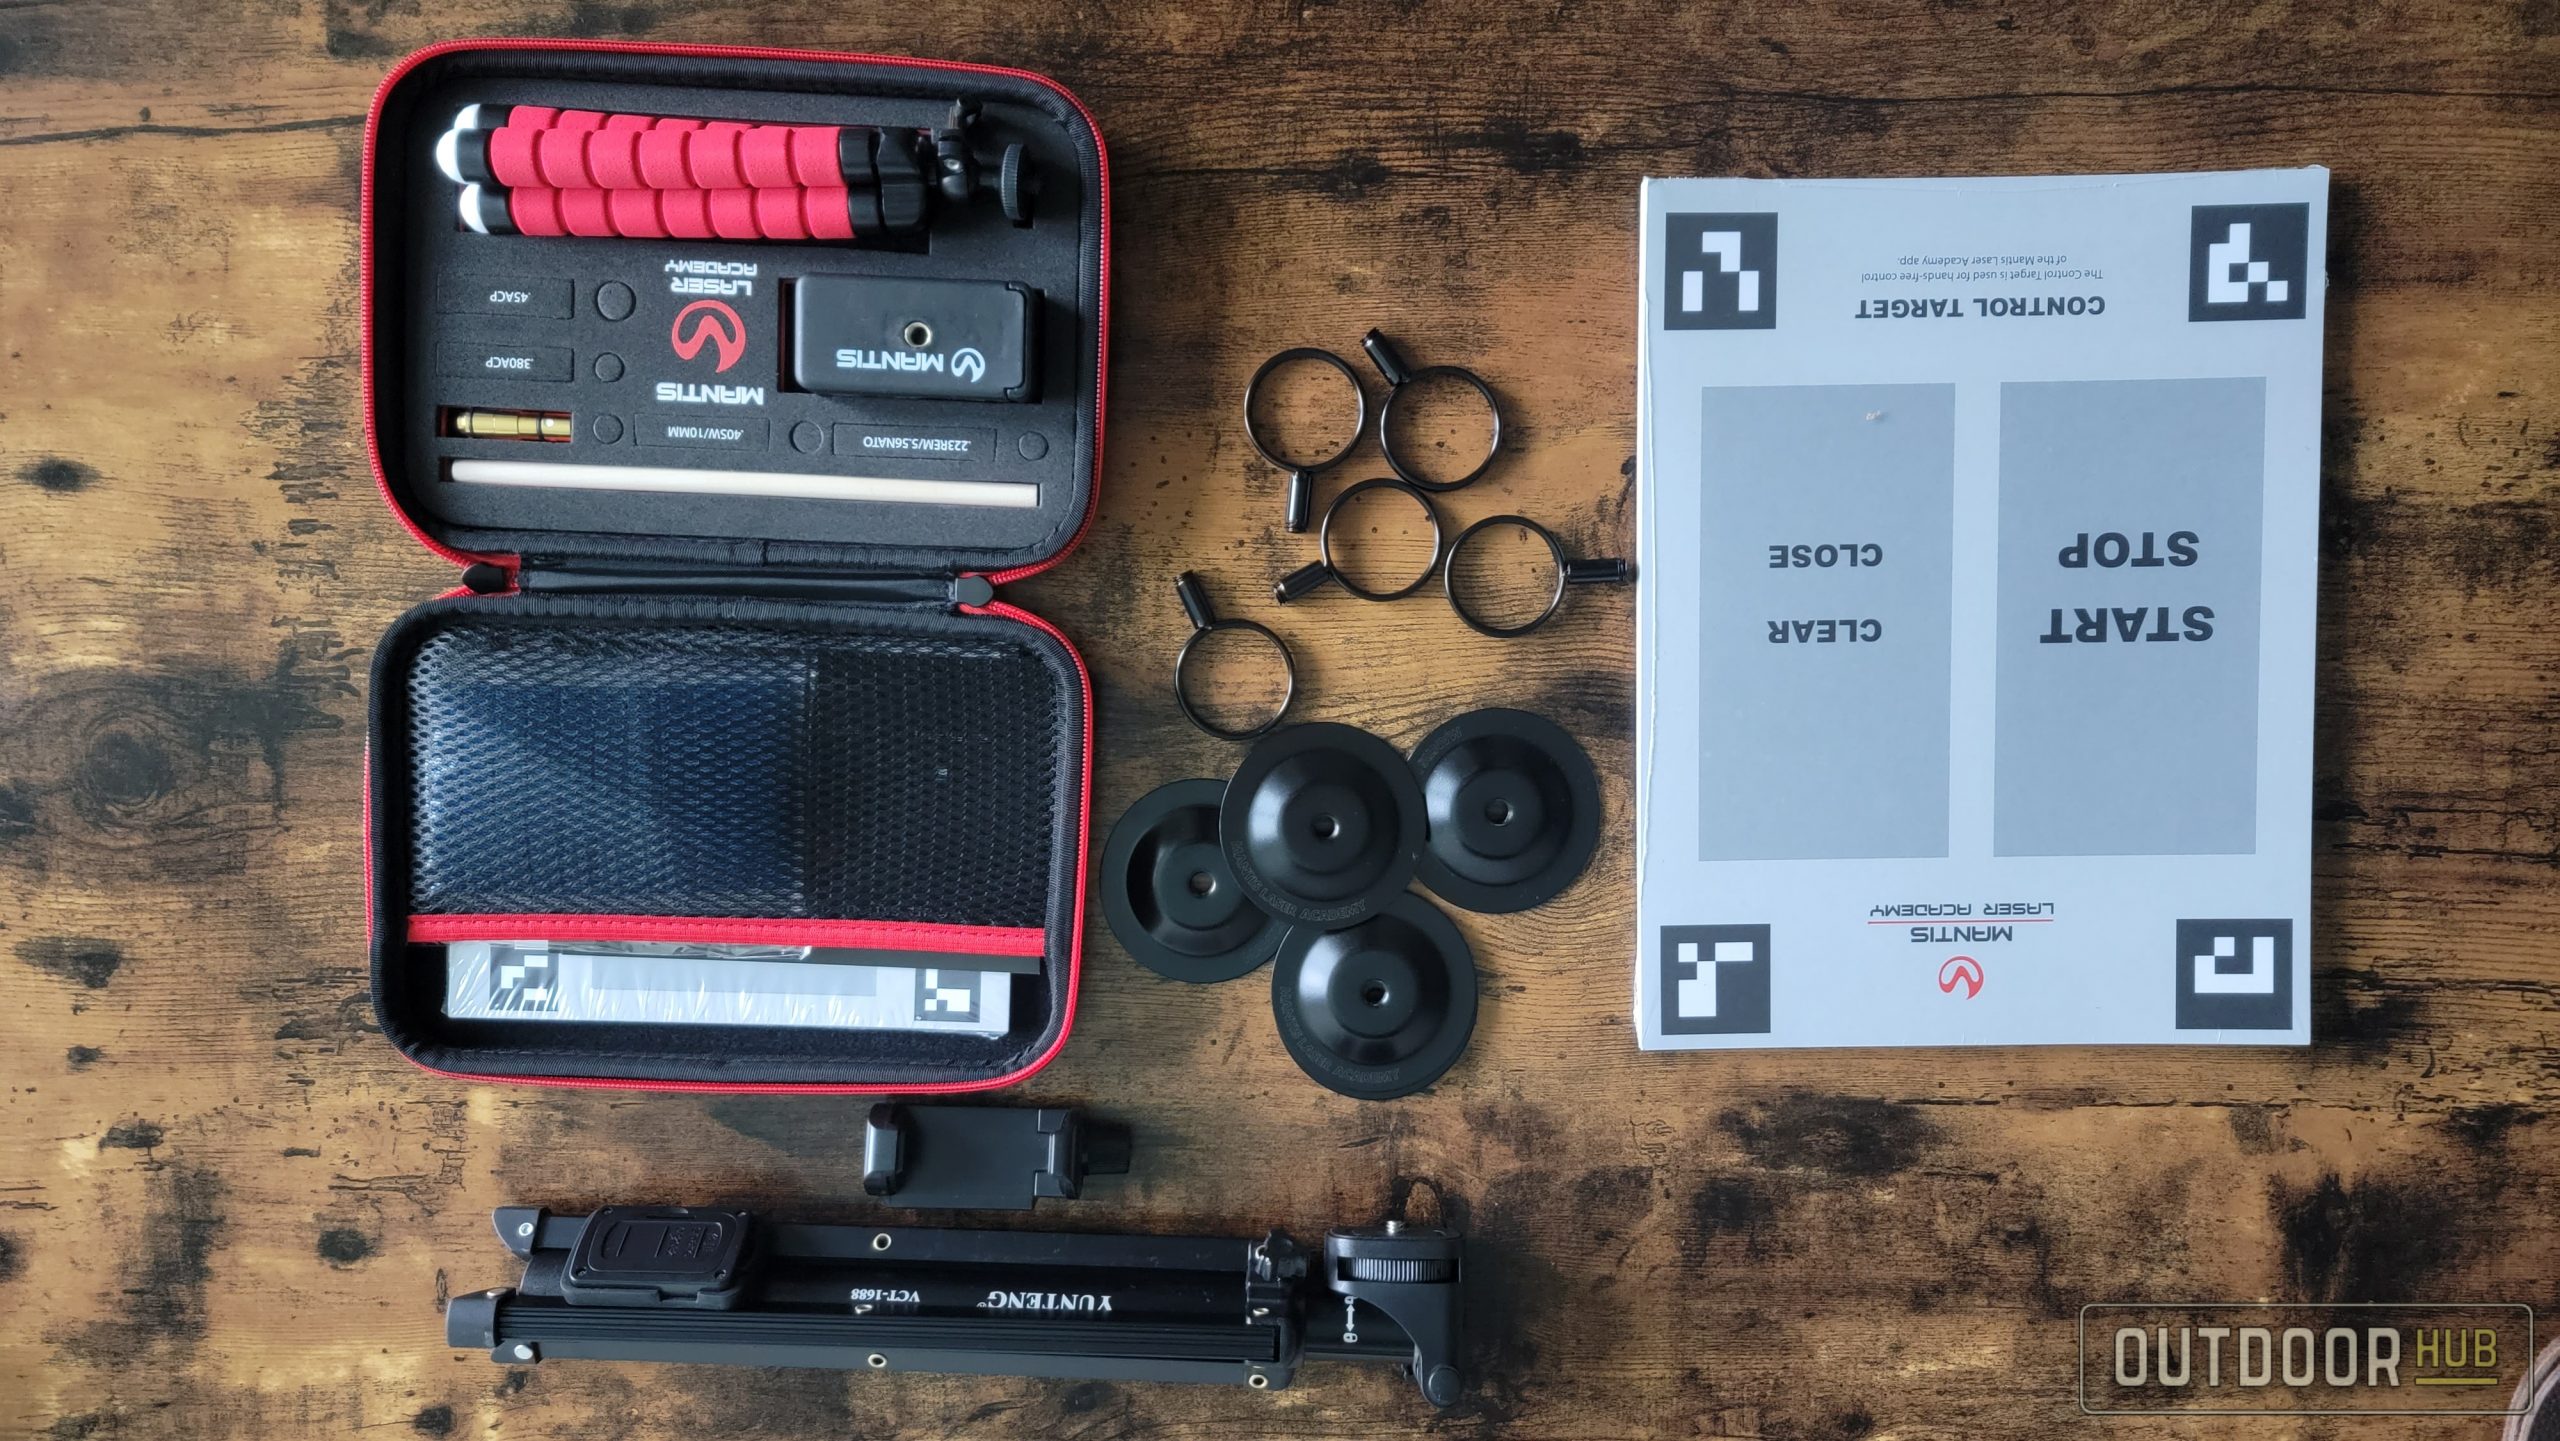 OutdoorHub Review: The MantisX Laser Academy Training Kit